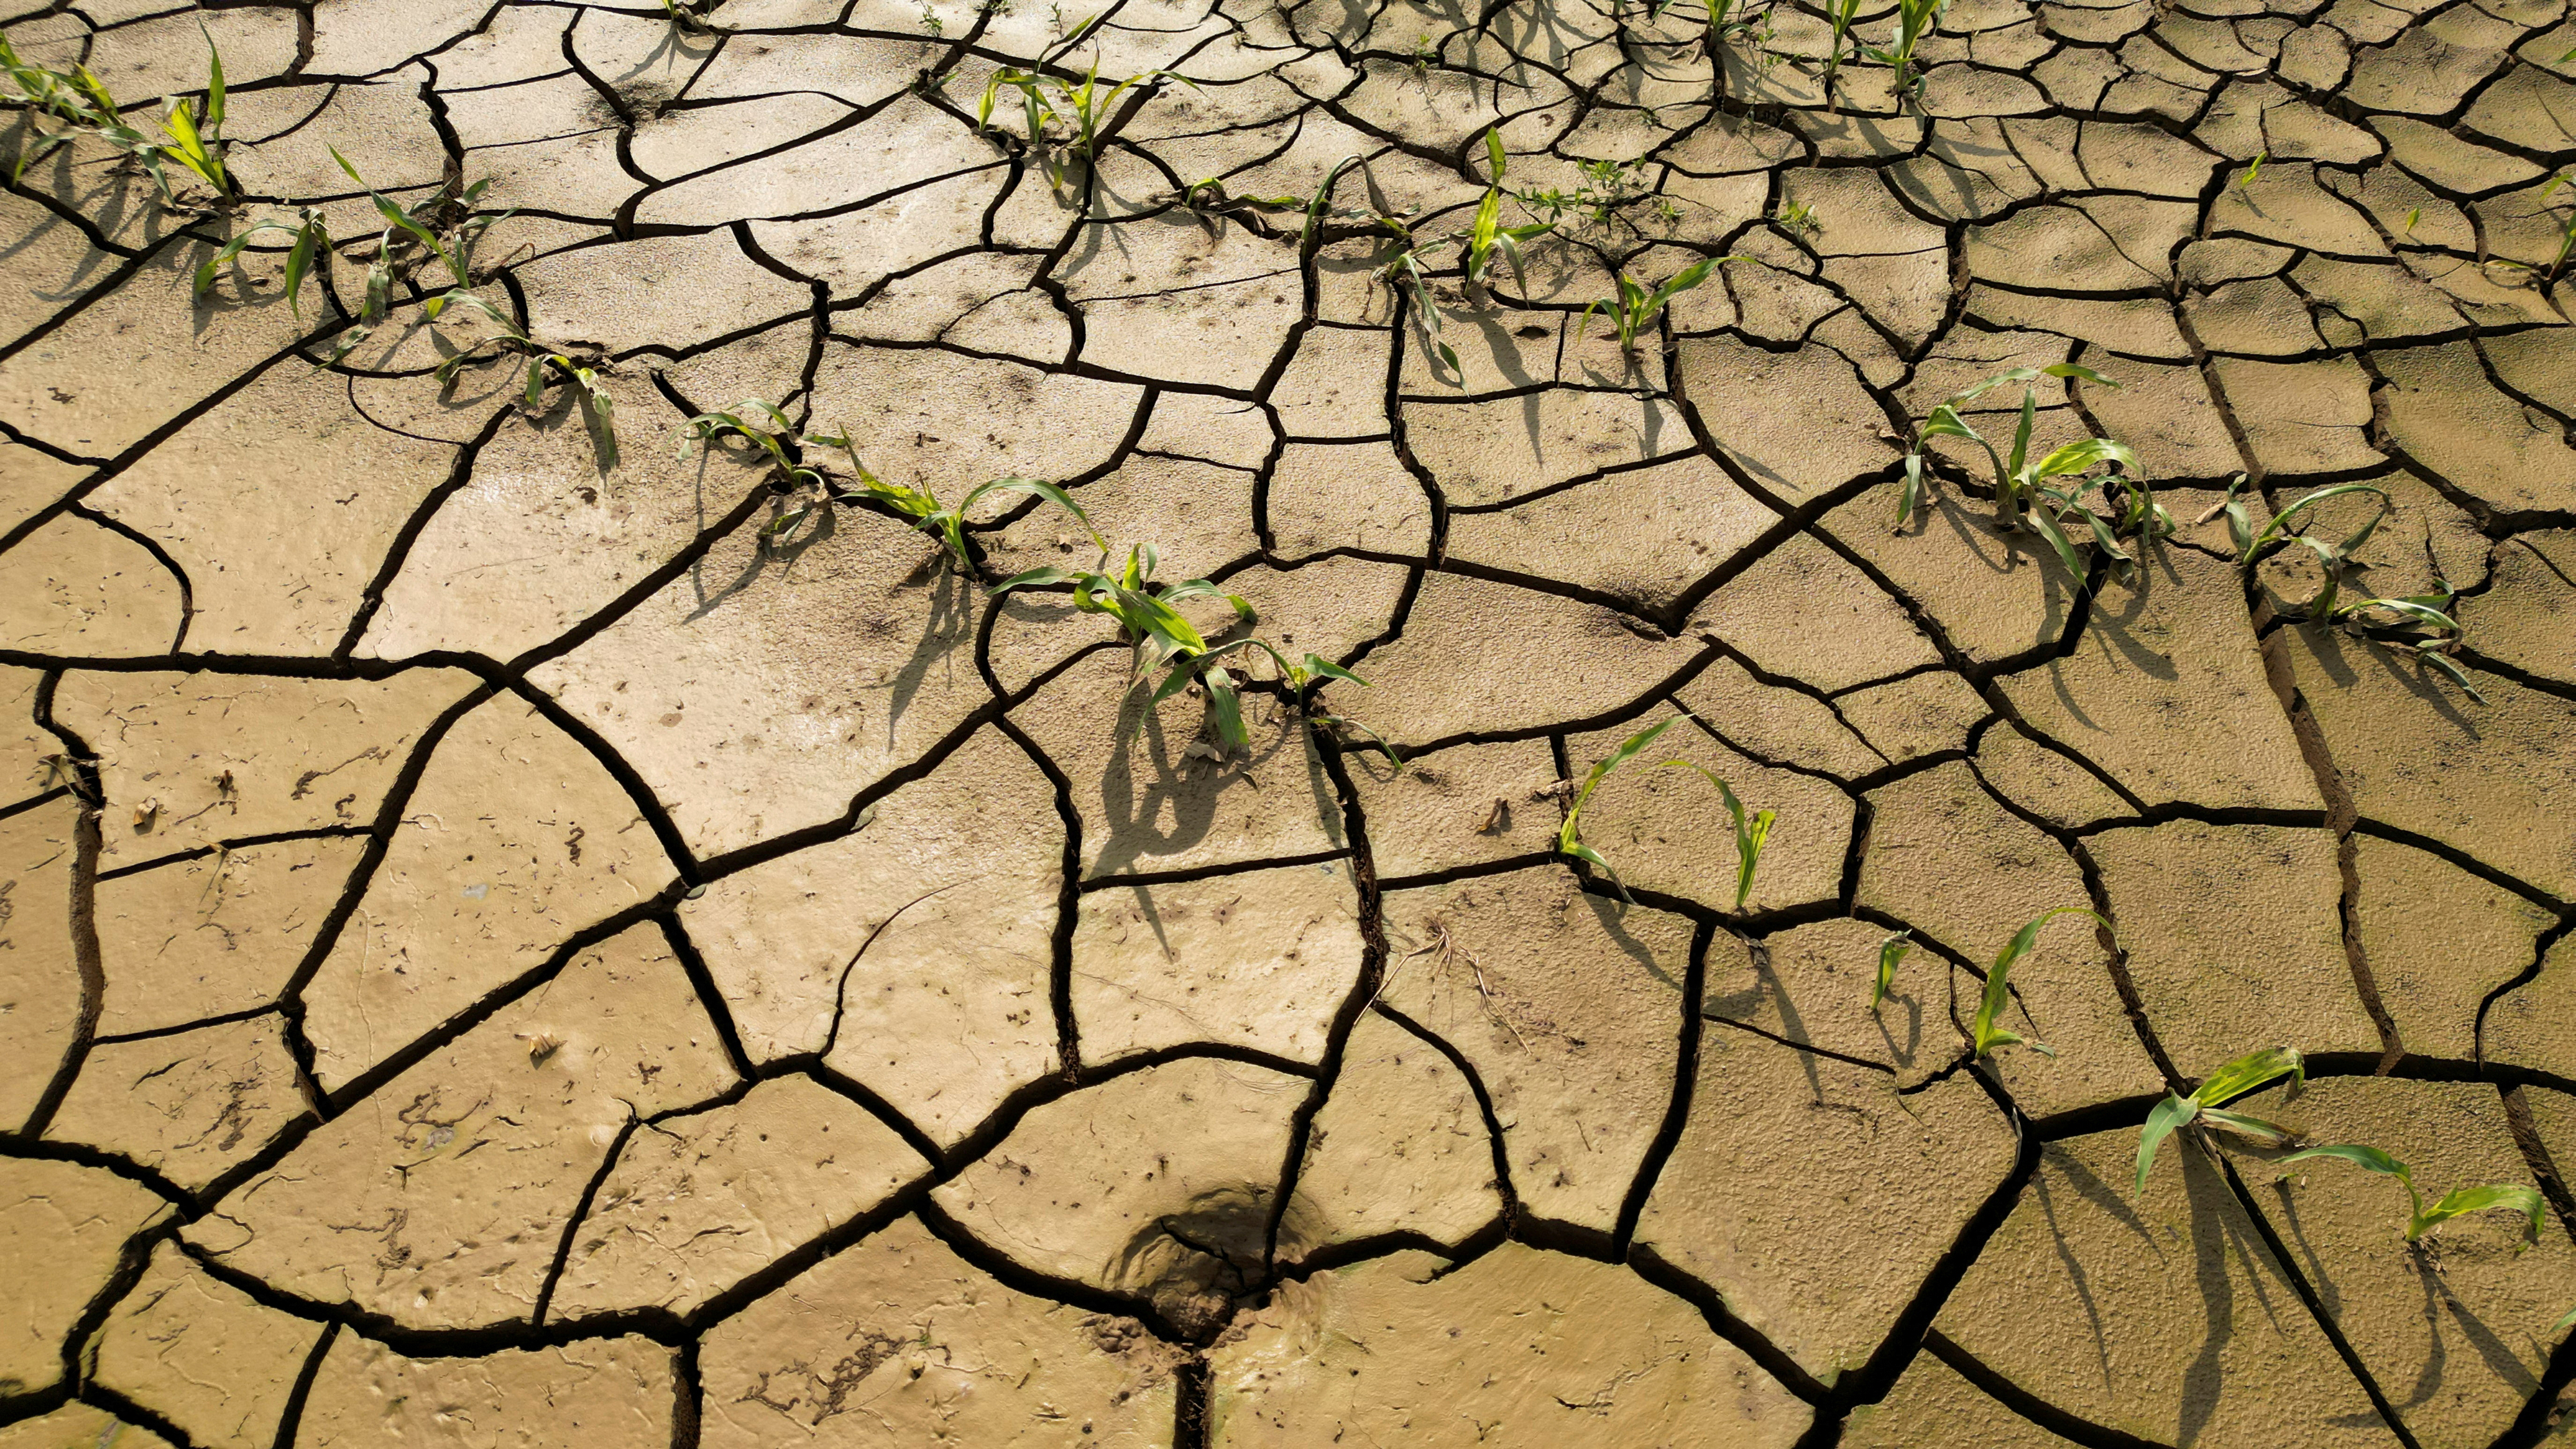 FRANCE-AGRICULTURE/DROUGHT